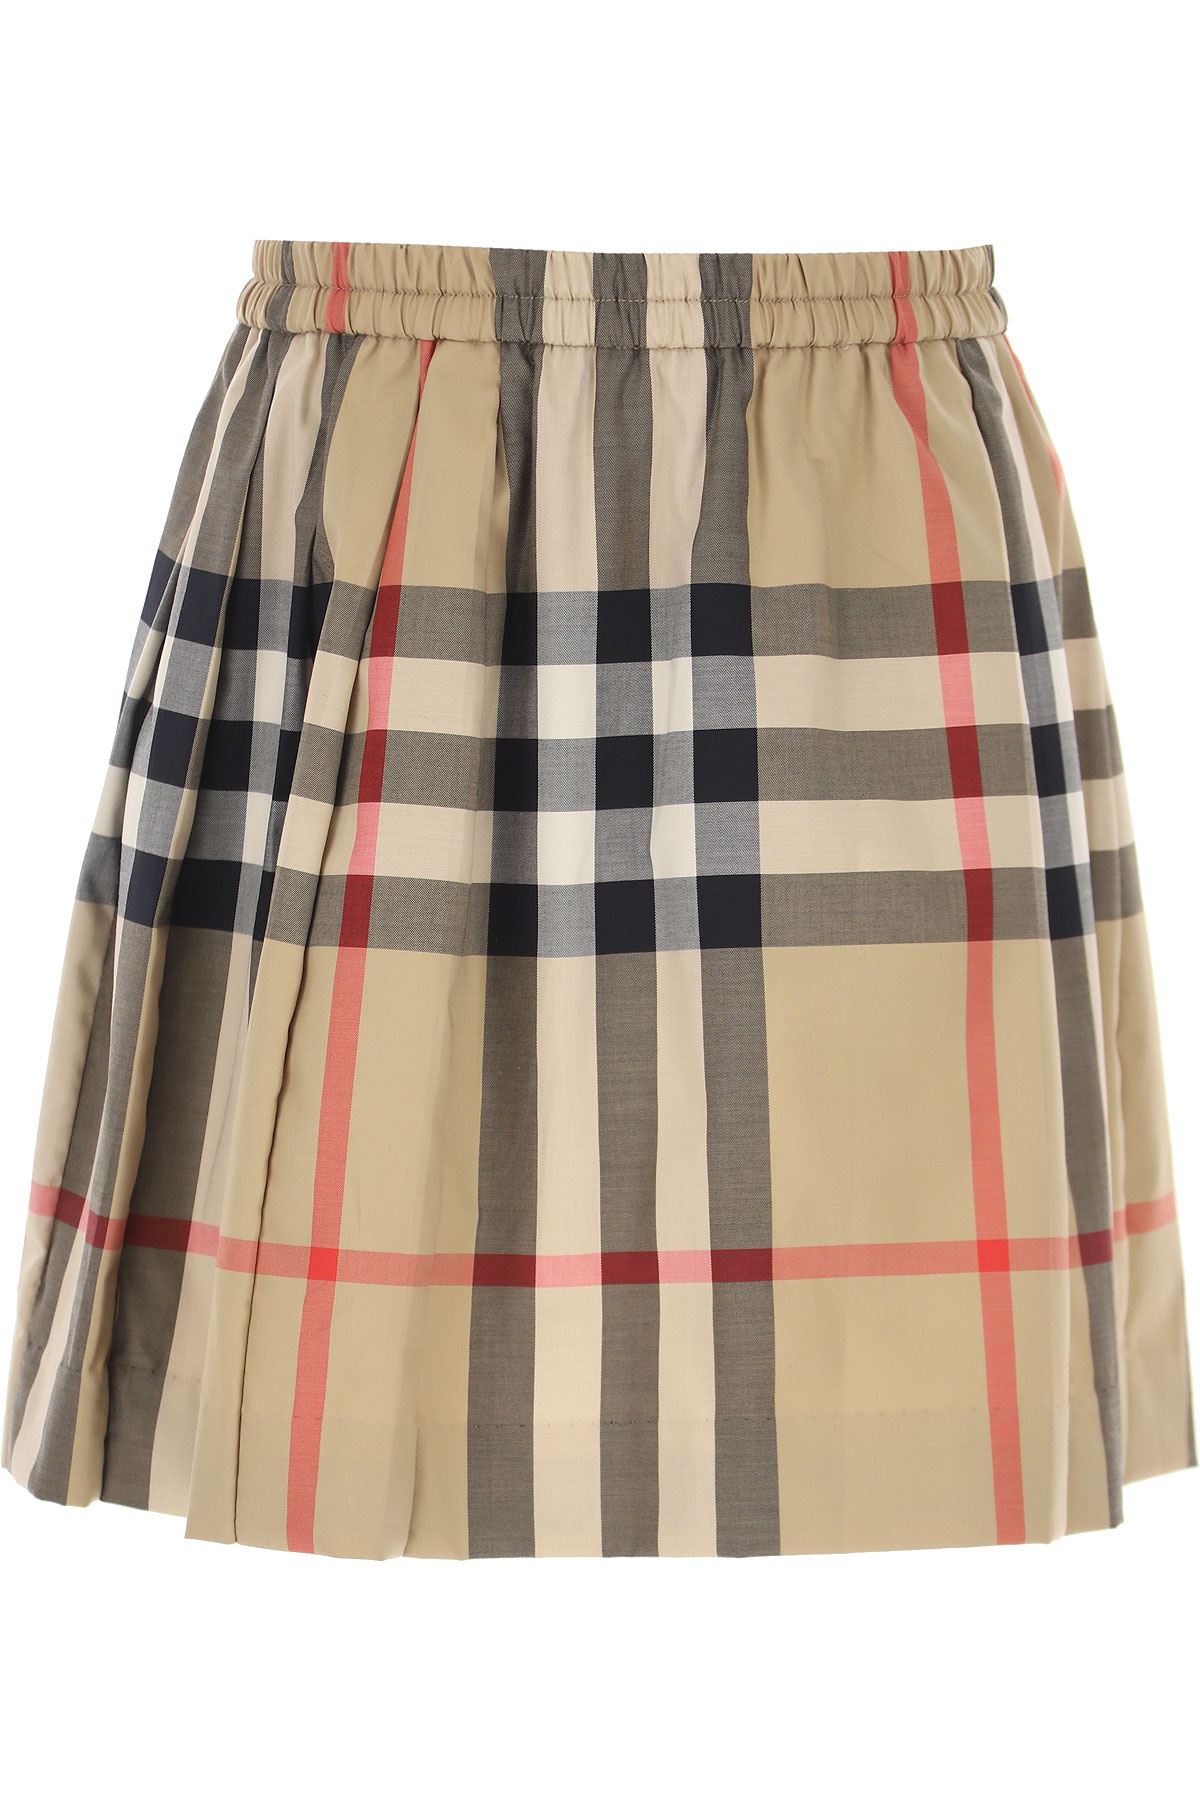 Girls Clothing Burberry, Style code: 8039522-a7028-